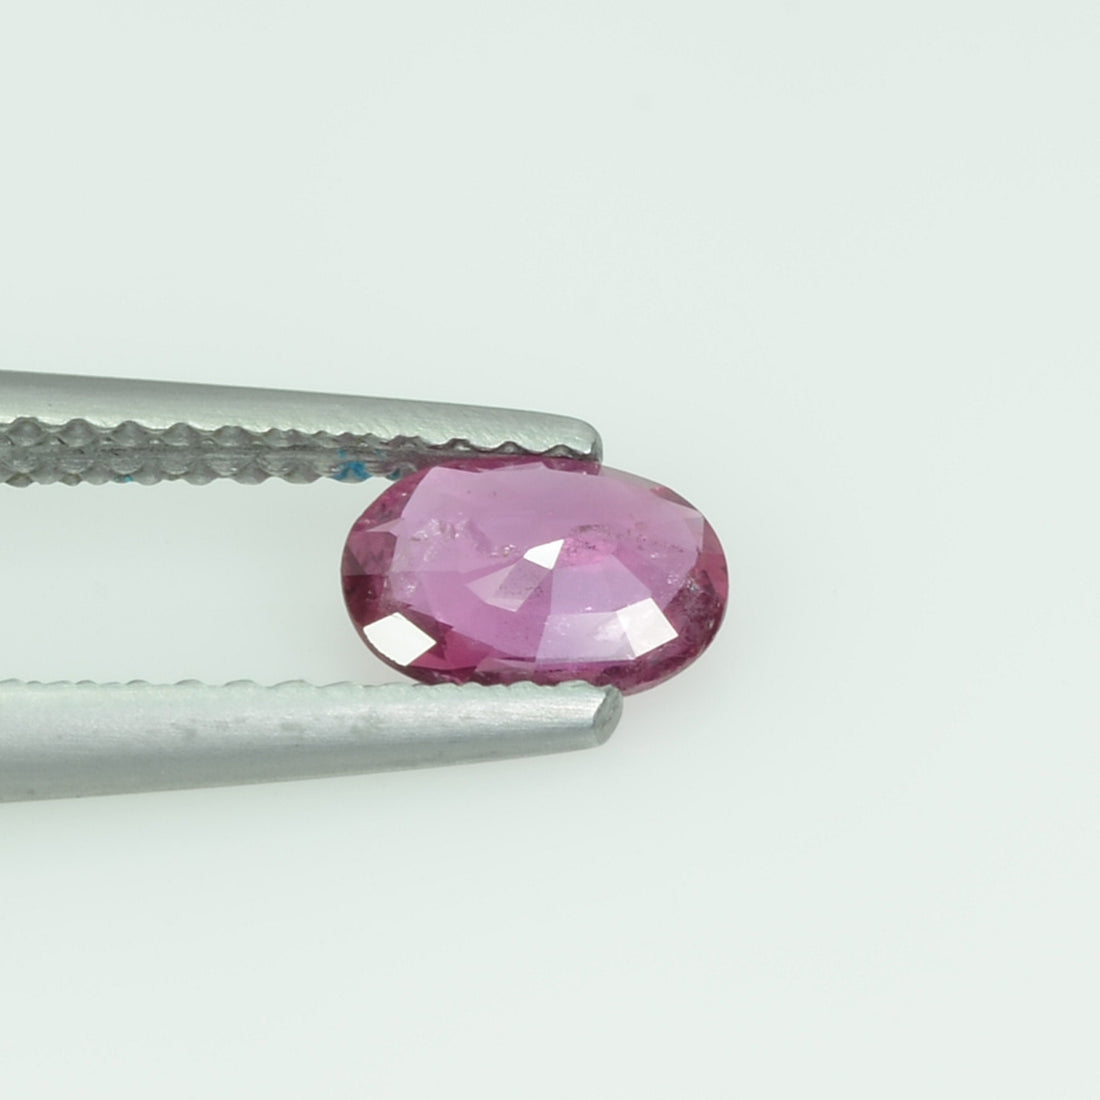 0.55 cts Natural Thai Ruby Loose Gemstone Oval Cut